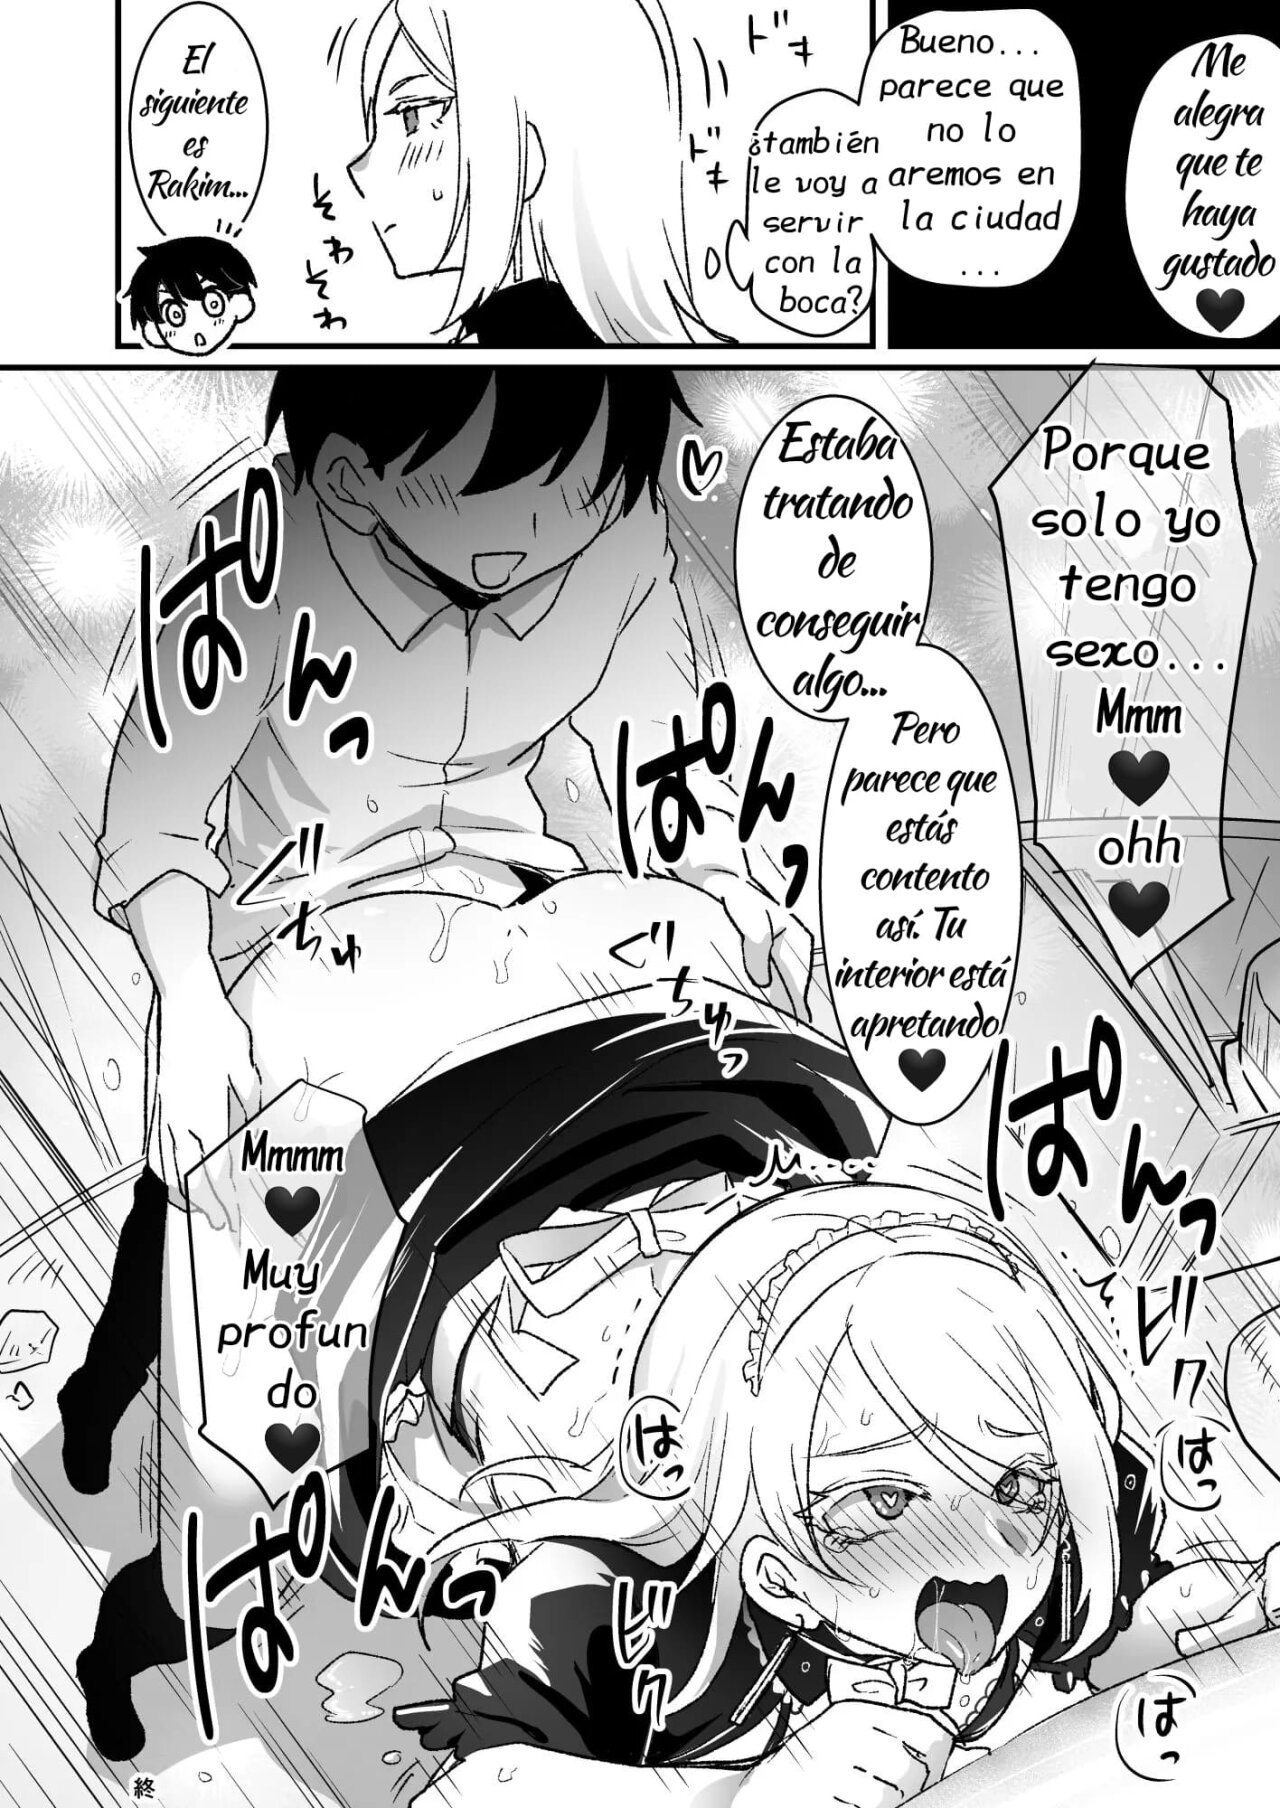 Manga of the strongest shota and female brothers(completo) - 24